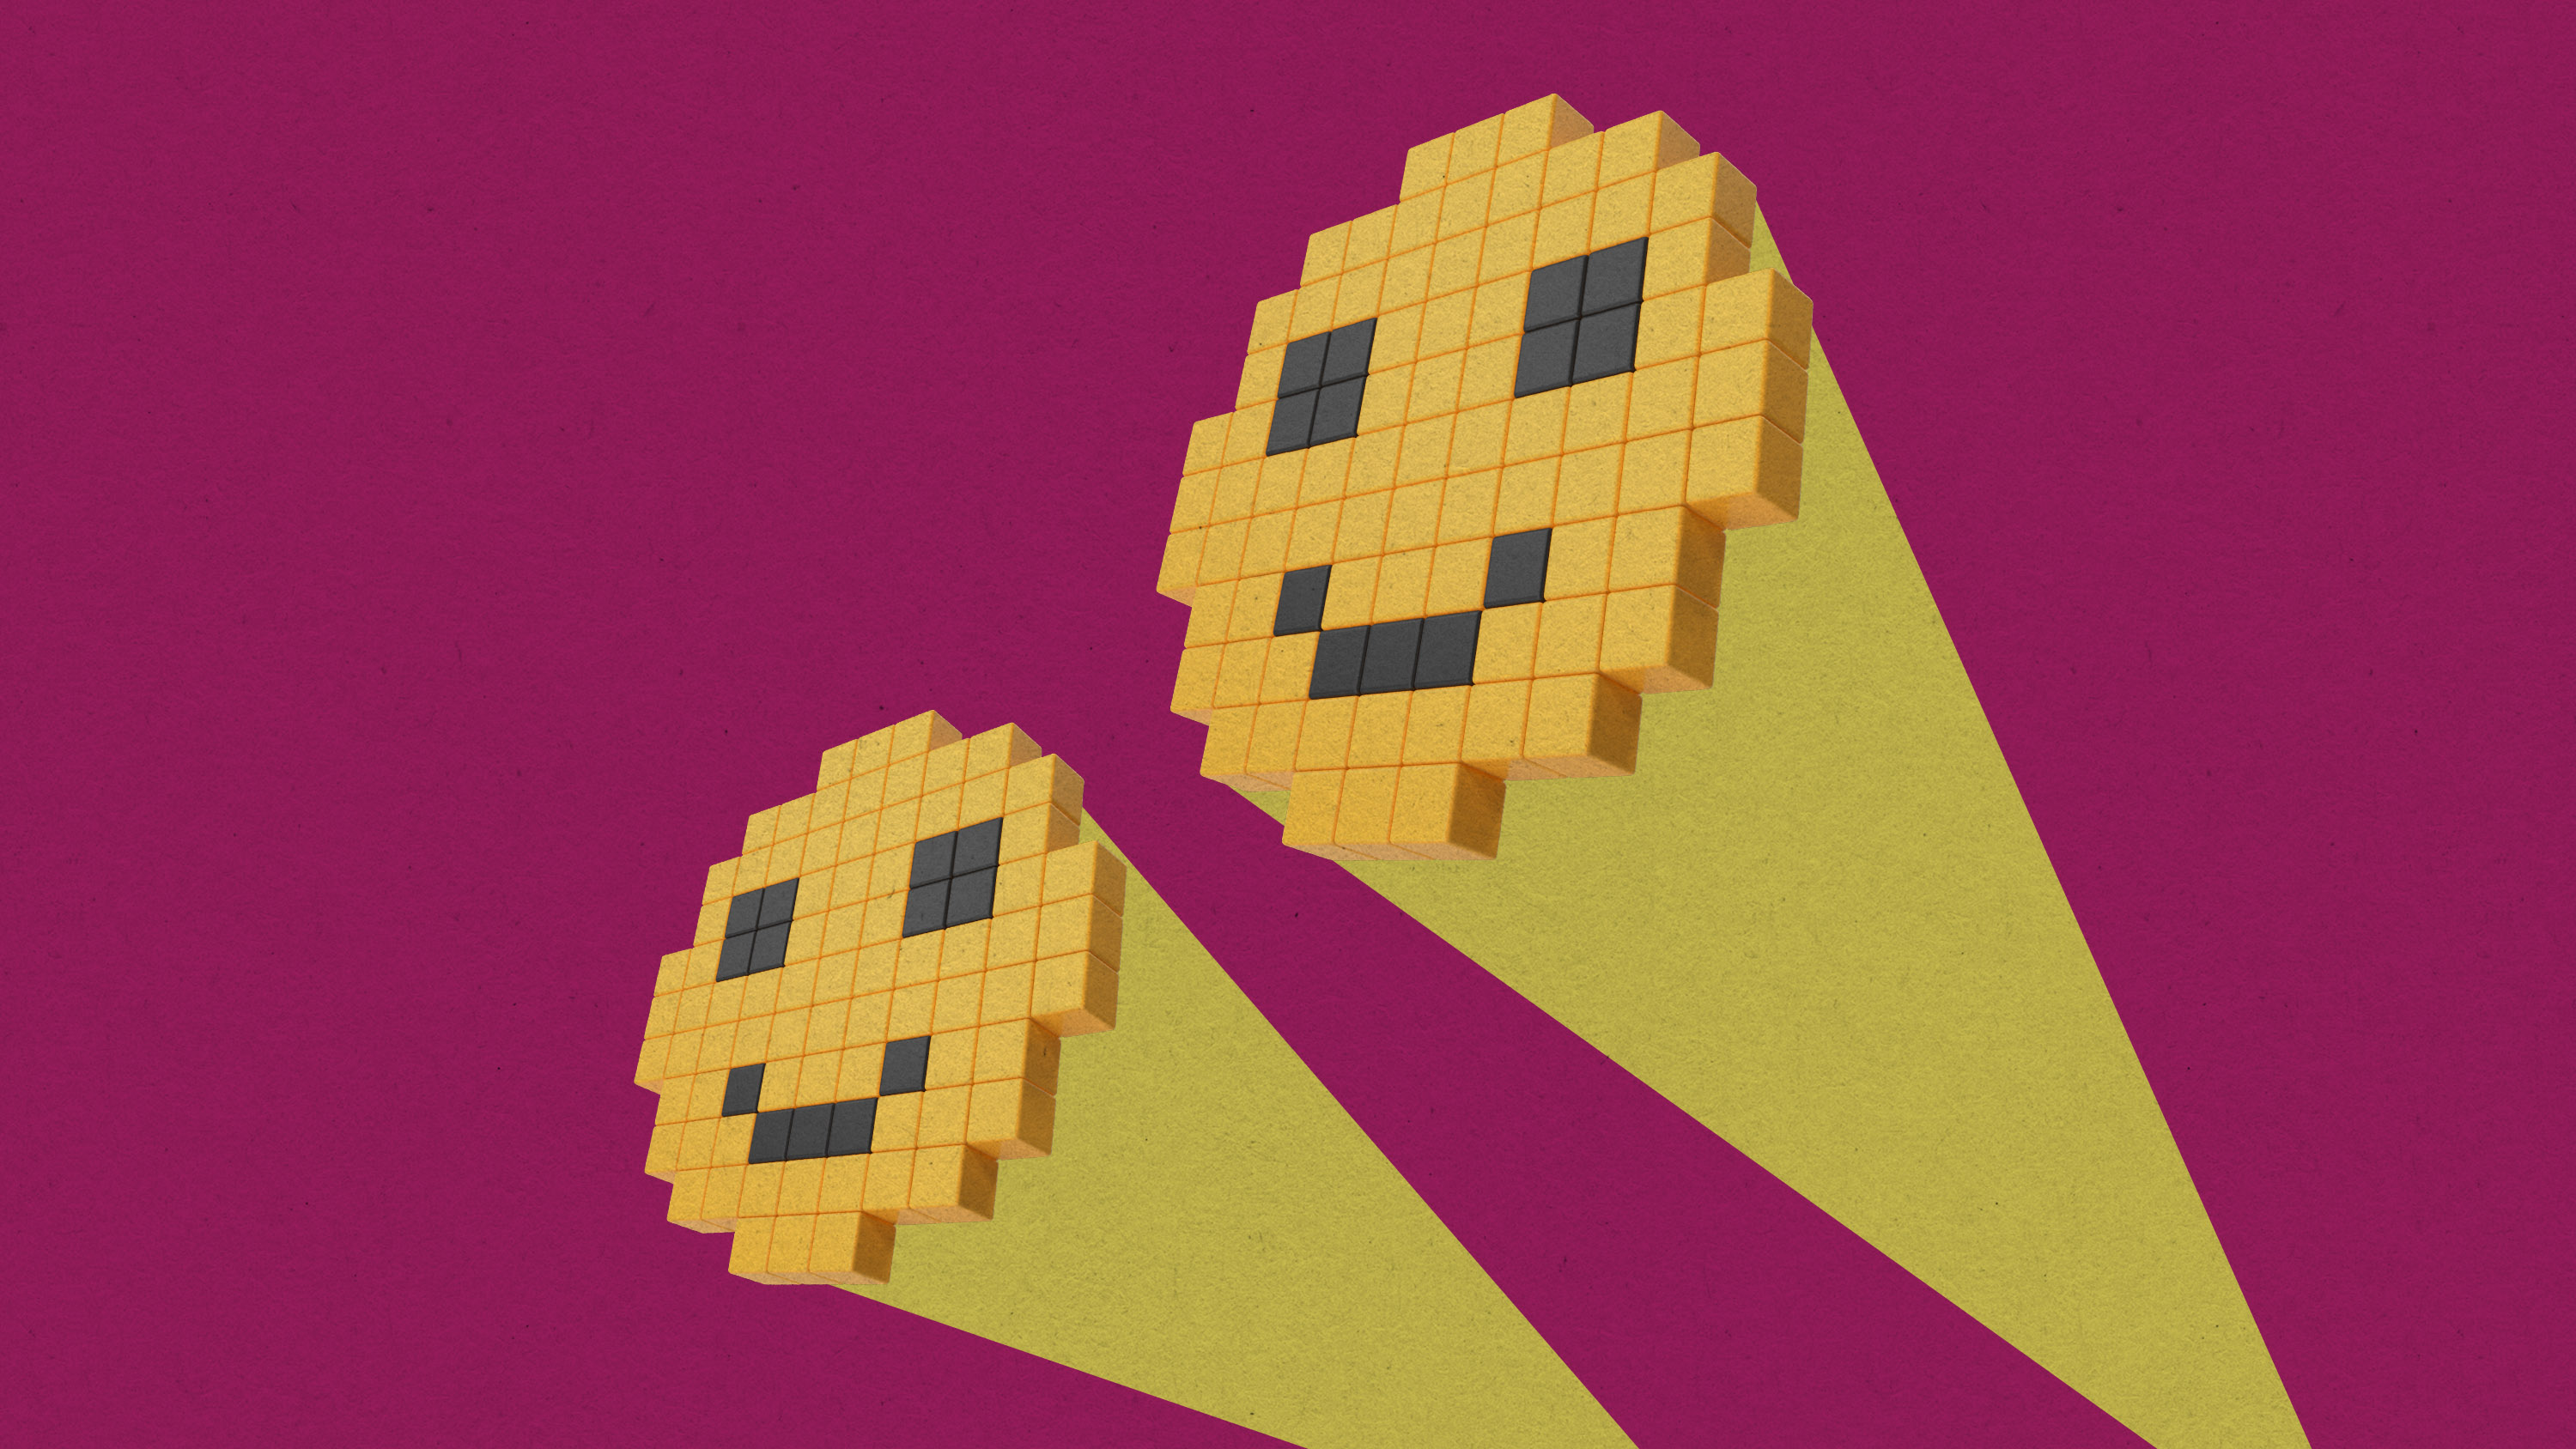 two smiley faces in a digital 8bit art style projecting from a spot outside the frame